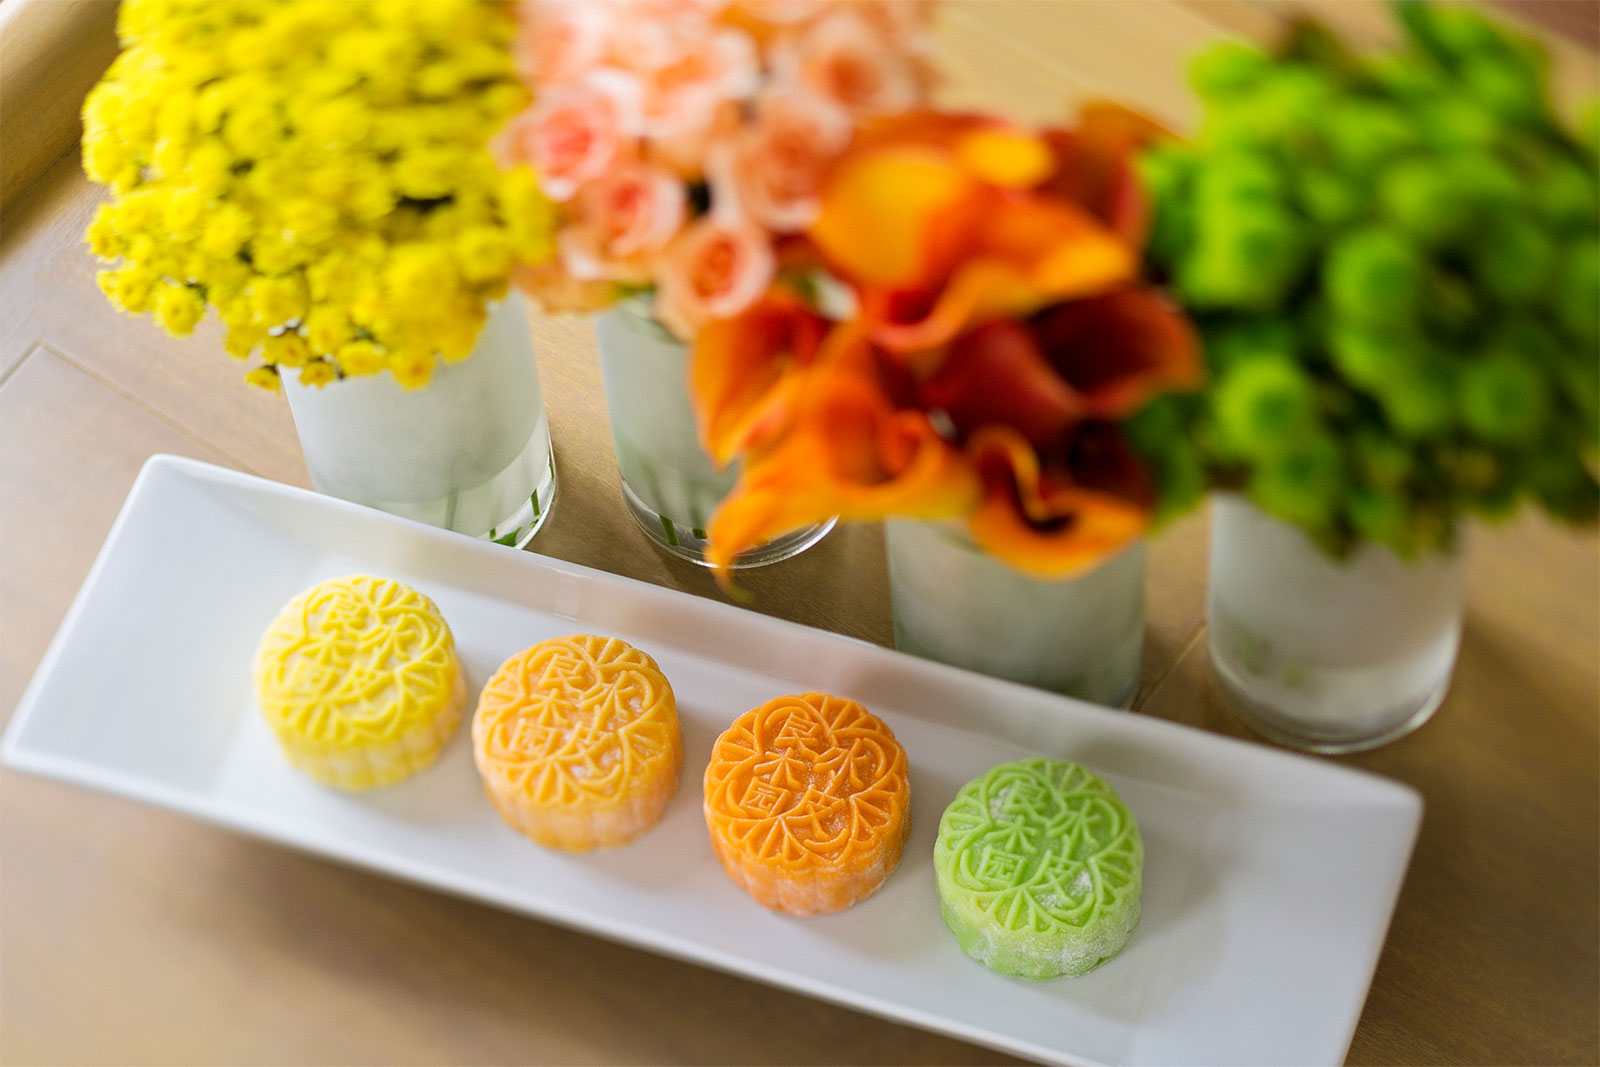 Snowskin mooncakes from Goodwood Park Hotel, Singapore